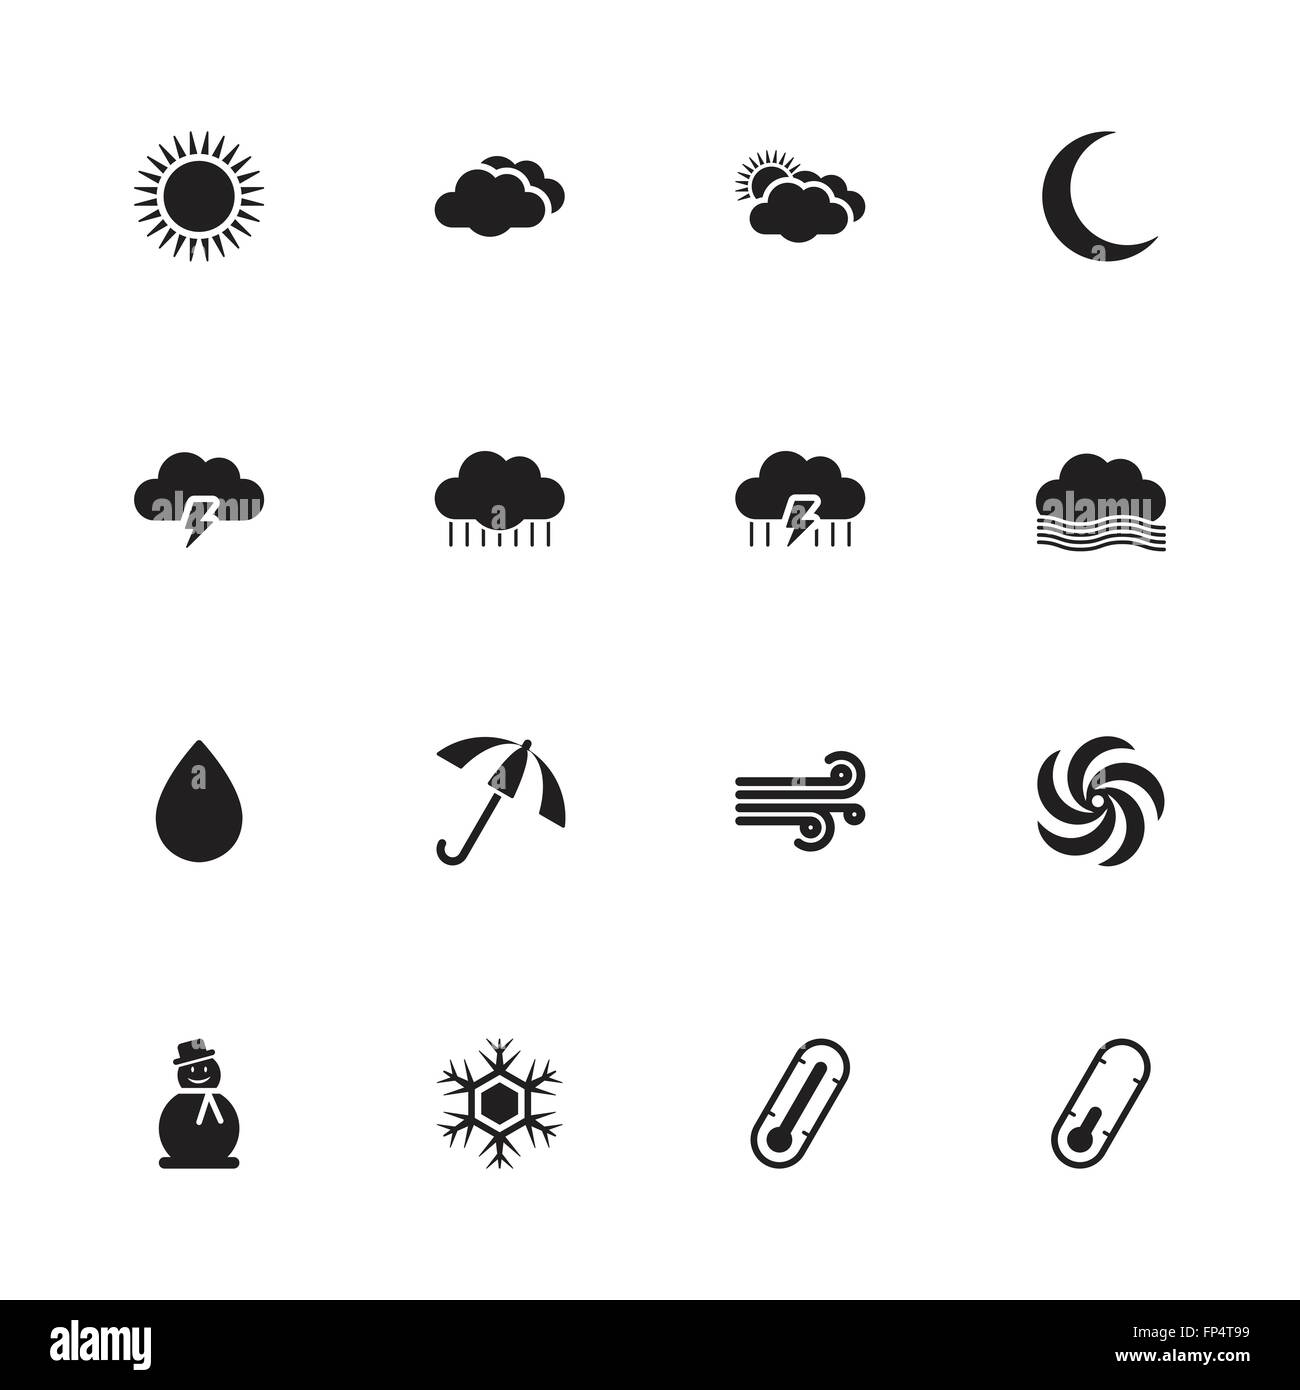 [JPEG] black simple flat weather icon set for web, UI, infographic and mobile apps Stock Vector